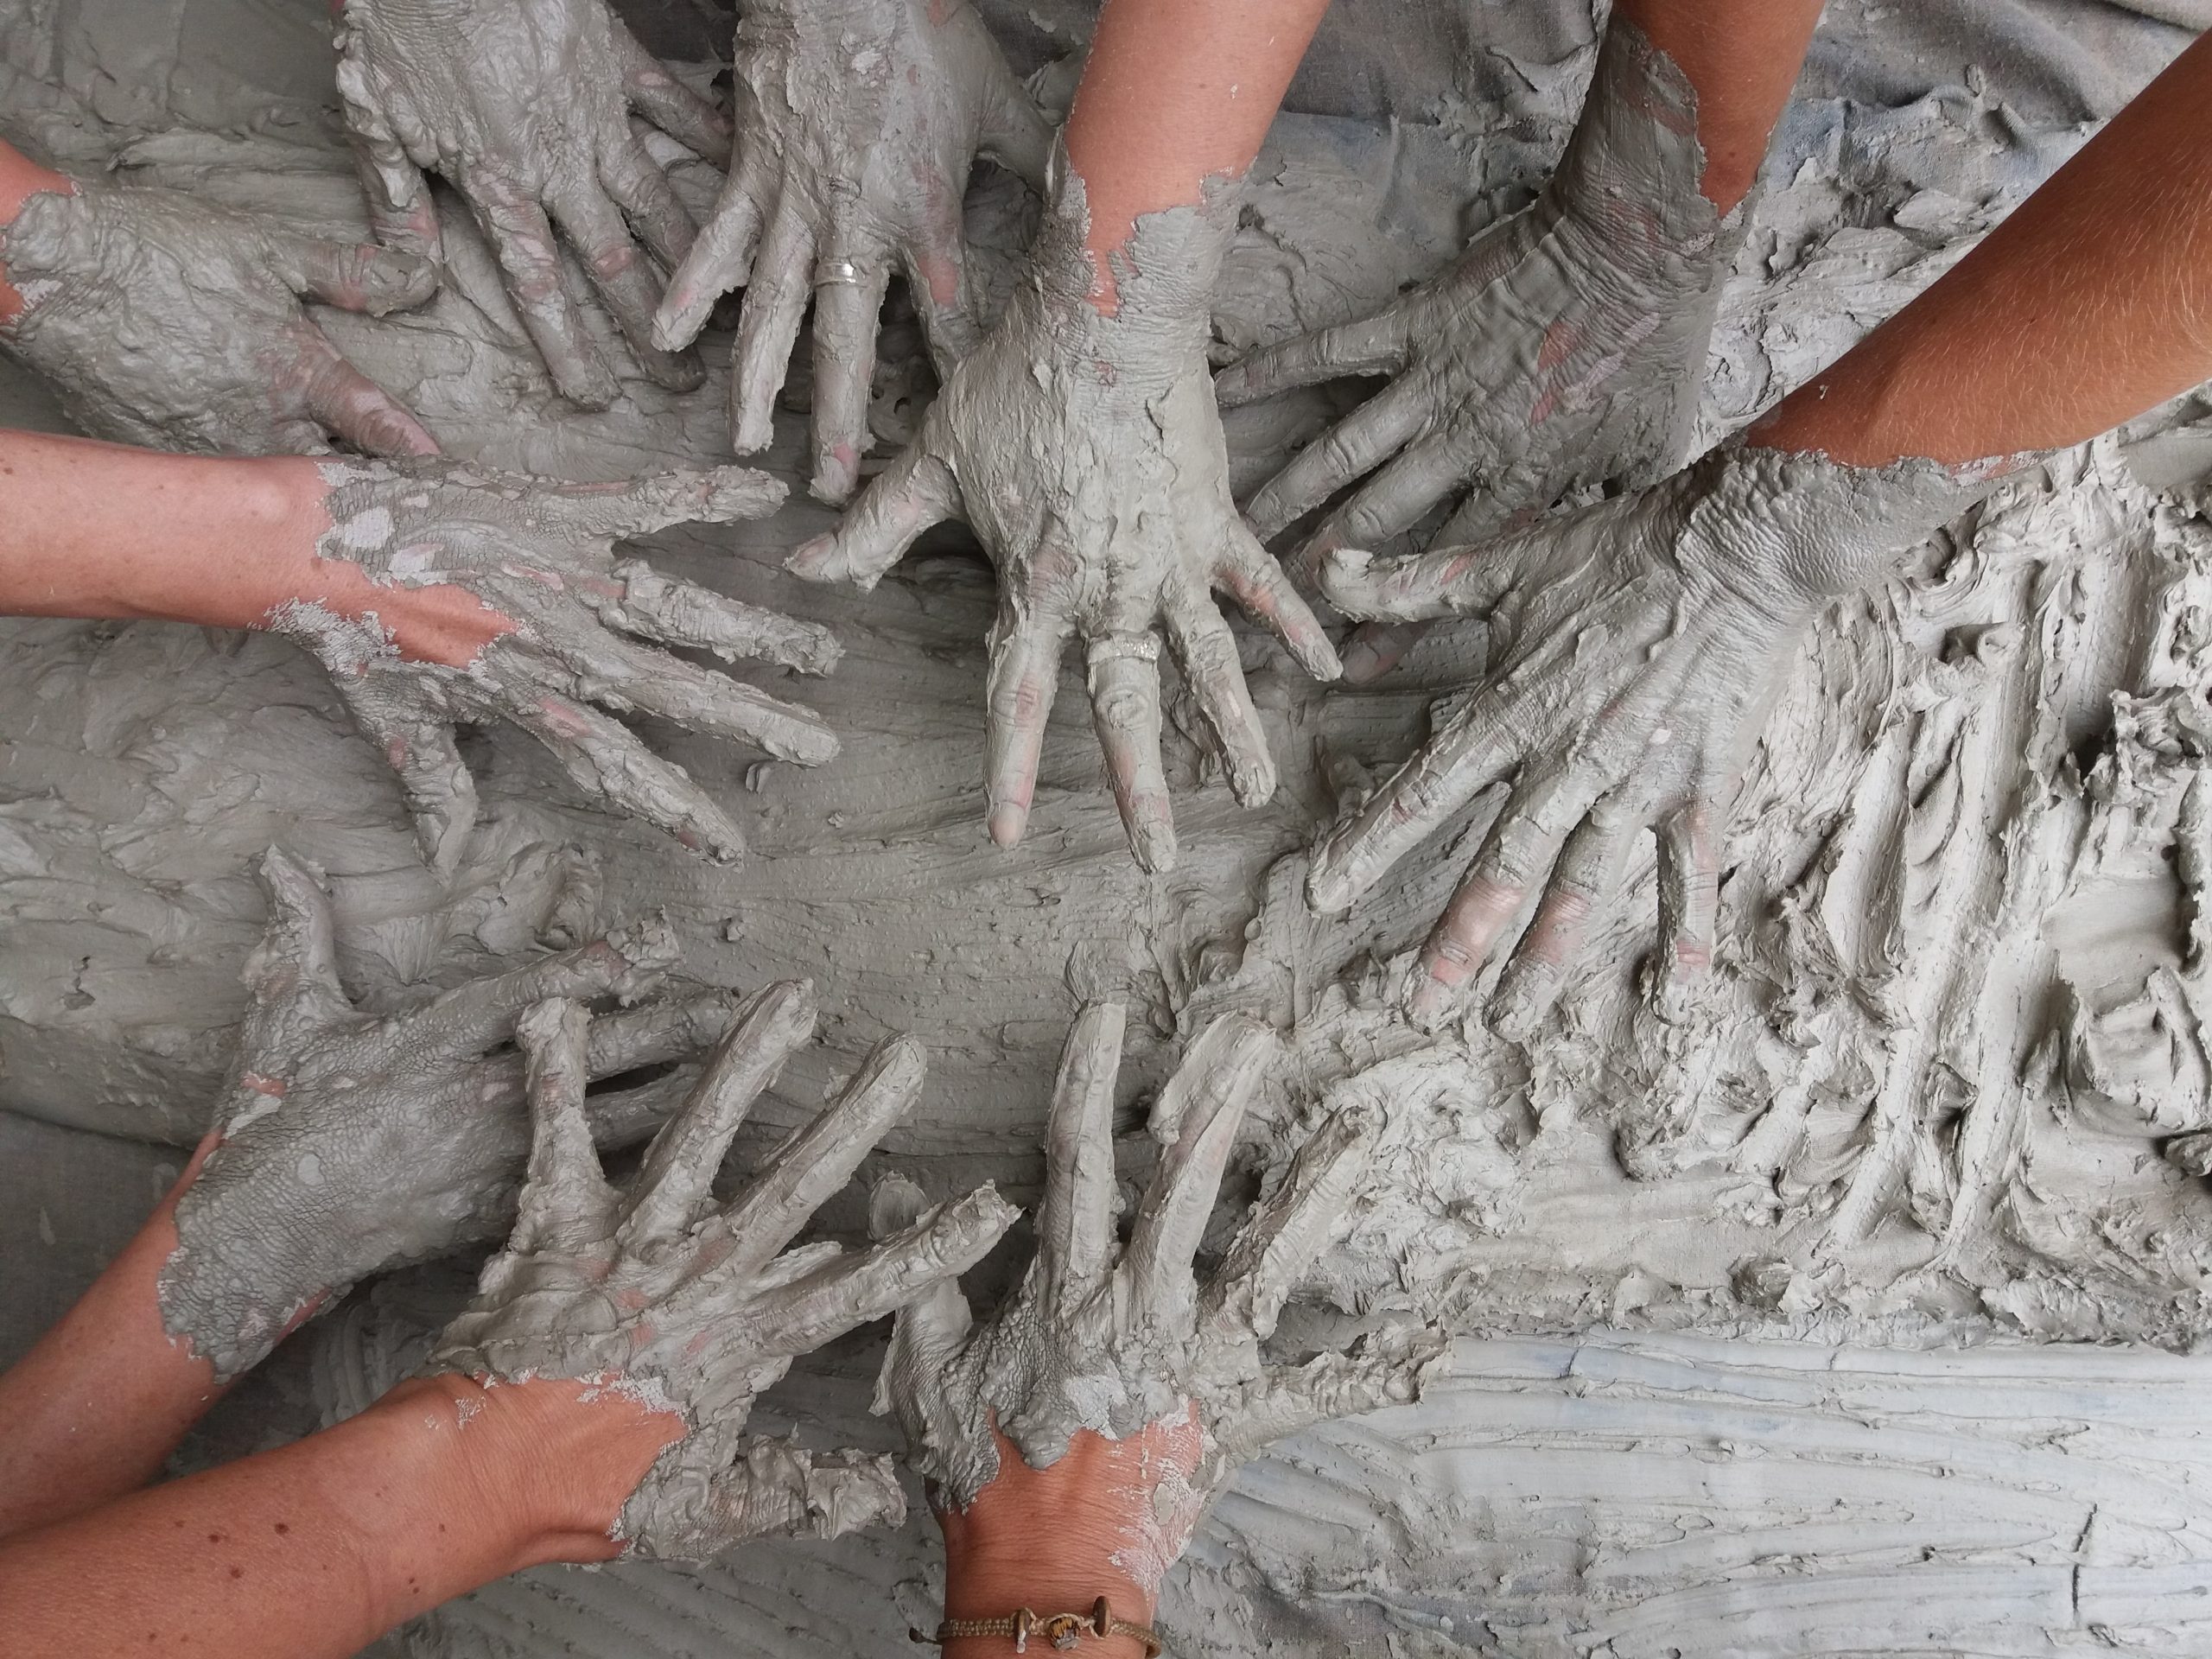 Hands Covered in Clay During a Class